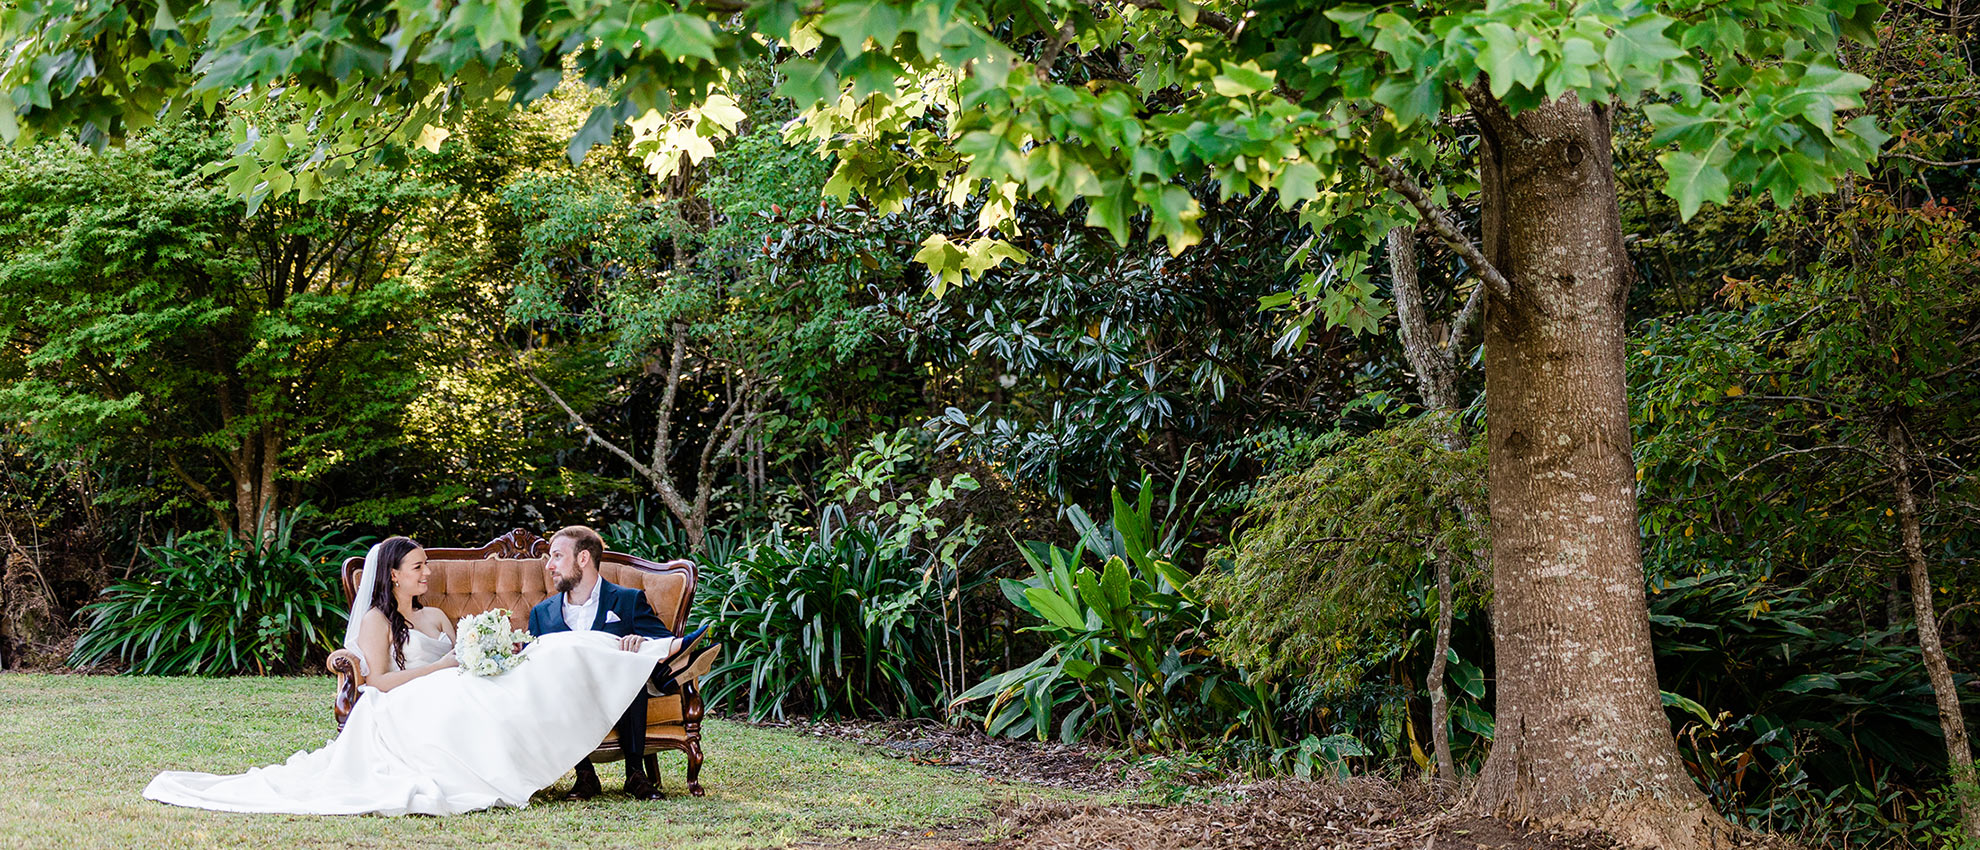 bride and groom on a seat under a tree